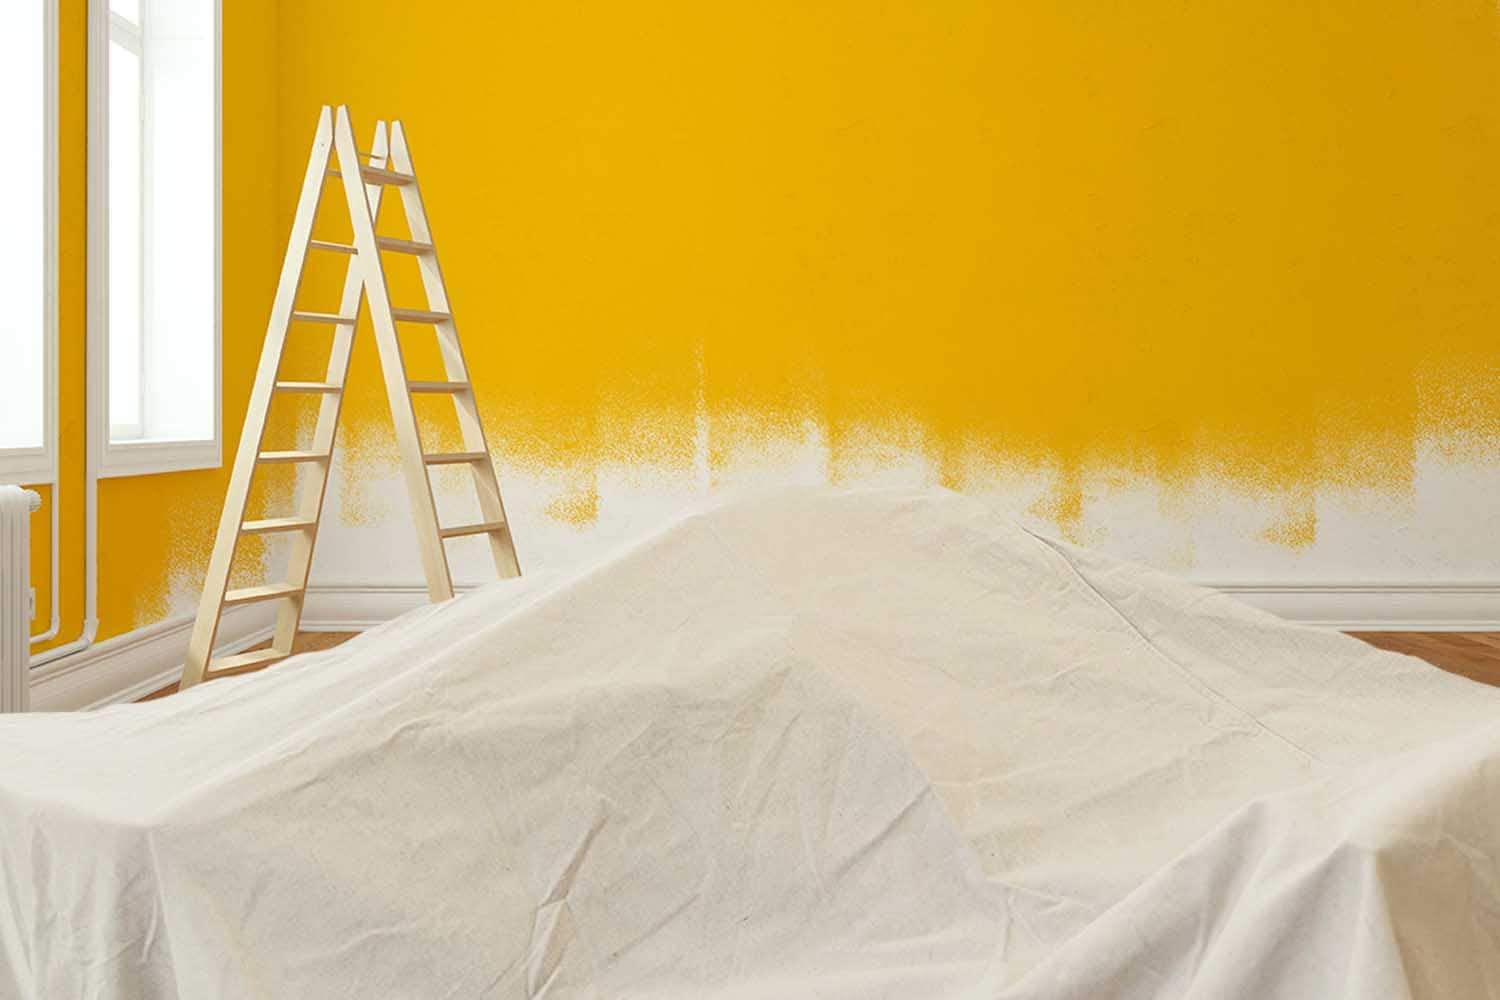 how to paint a room - use fabric drop cloths